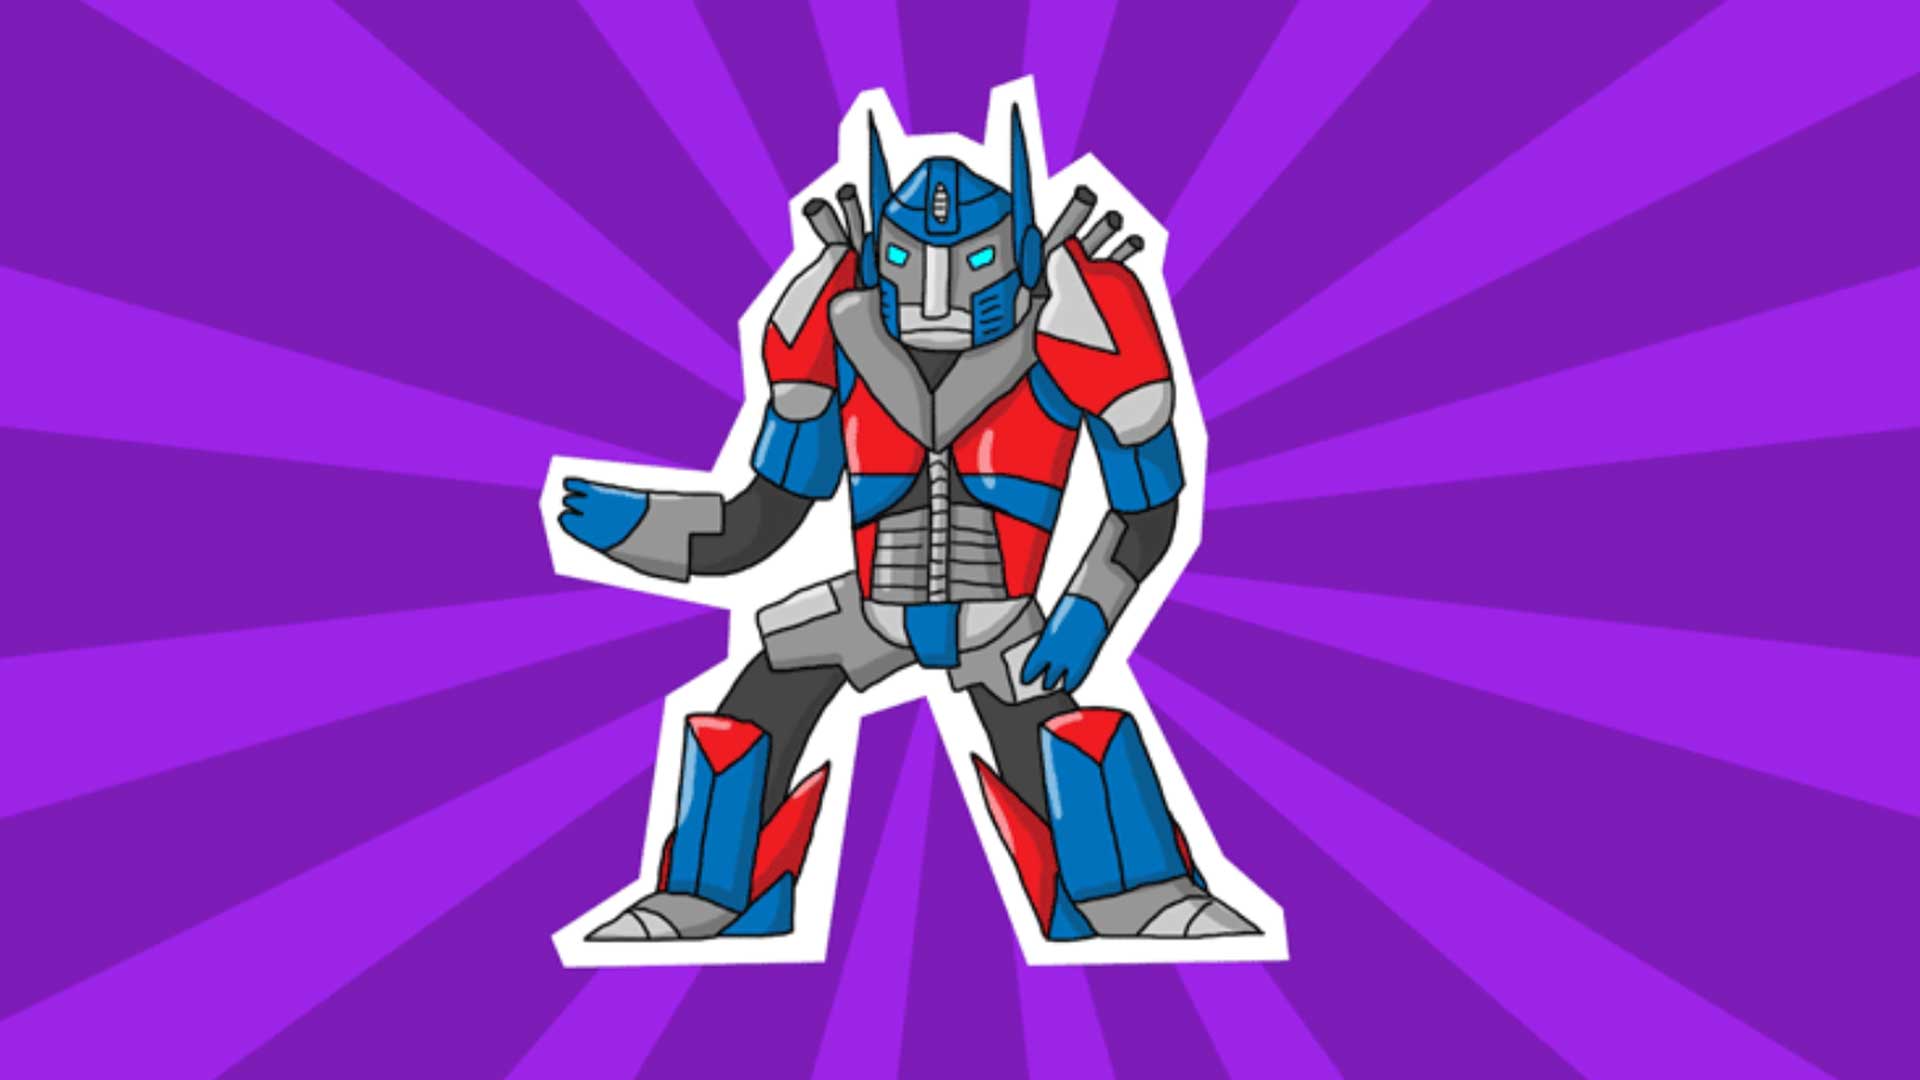 A drawing of a Transformer toy